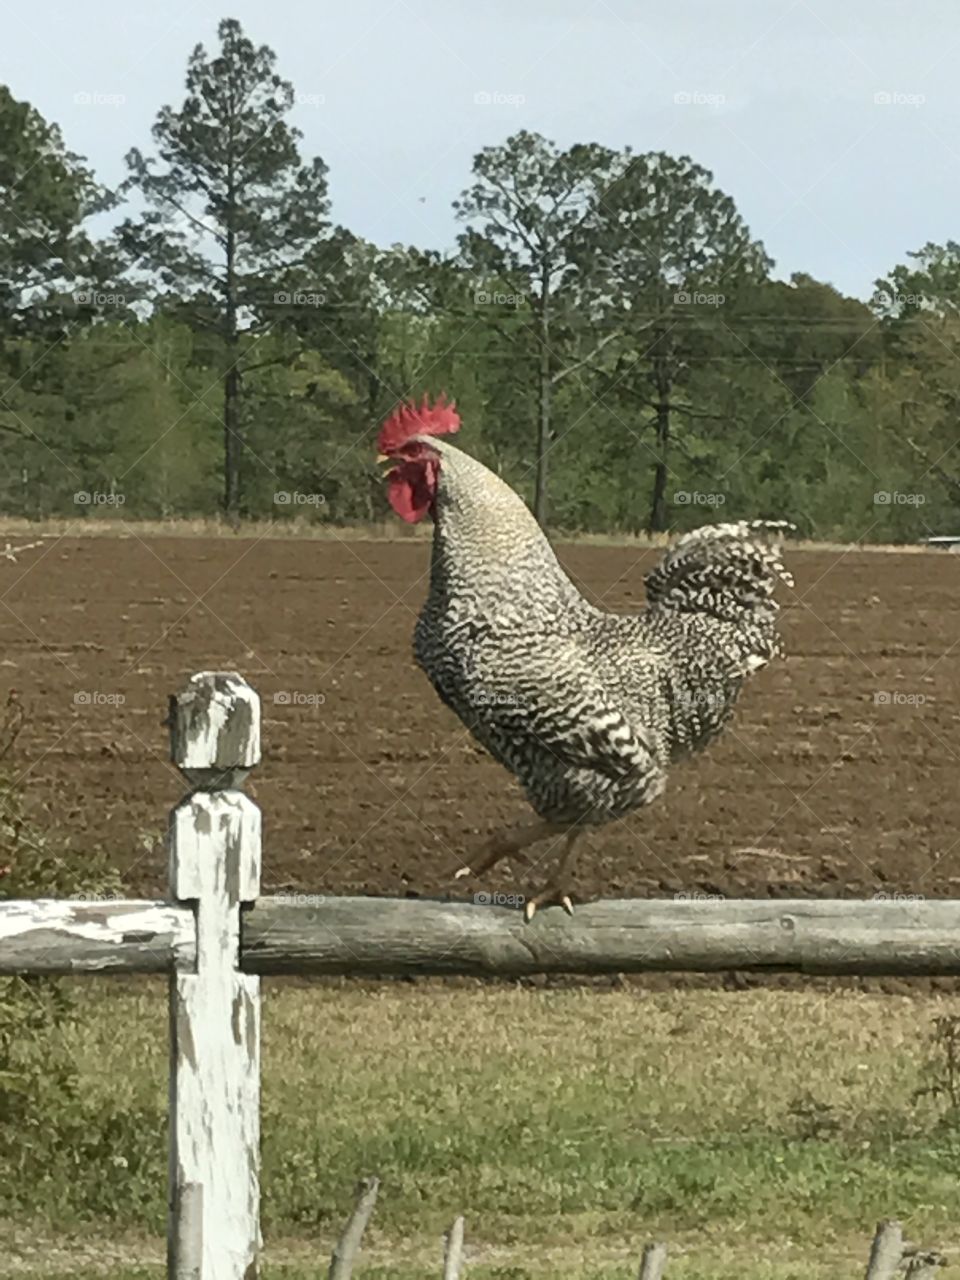 Rudy the rooster crowing on the fence